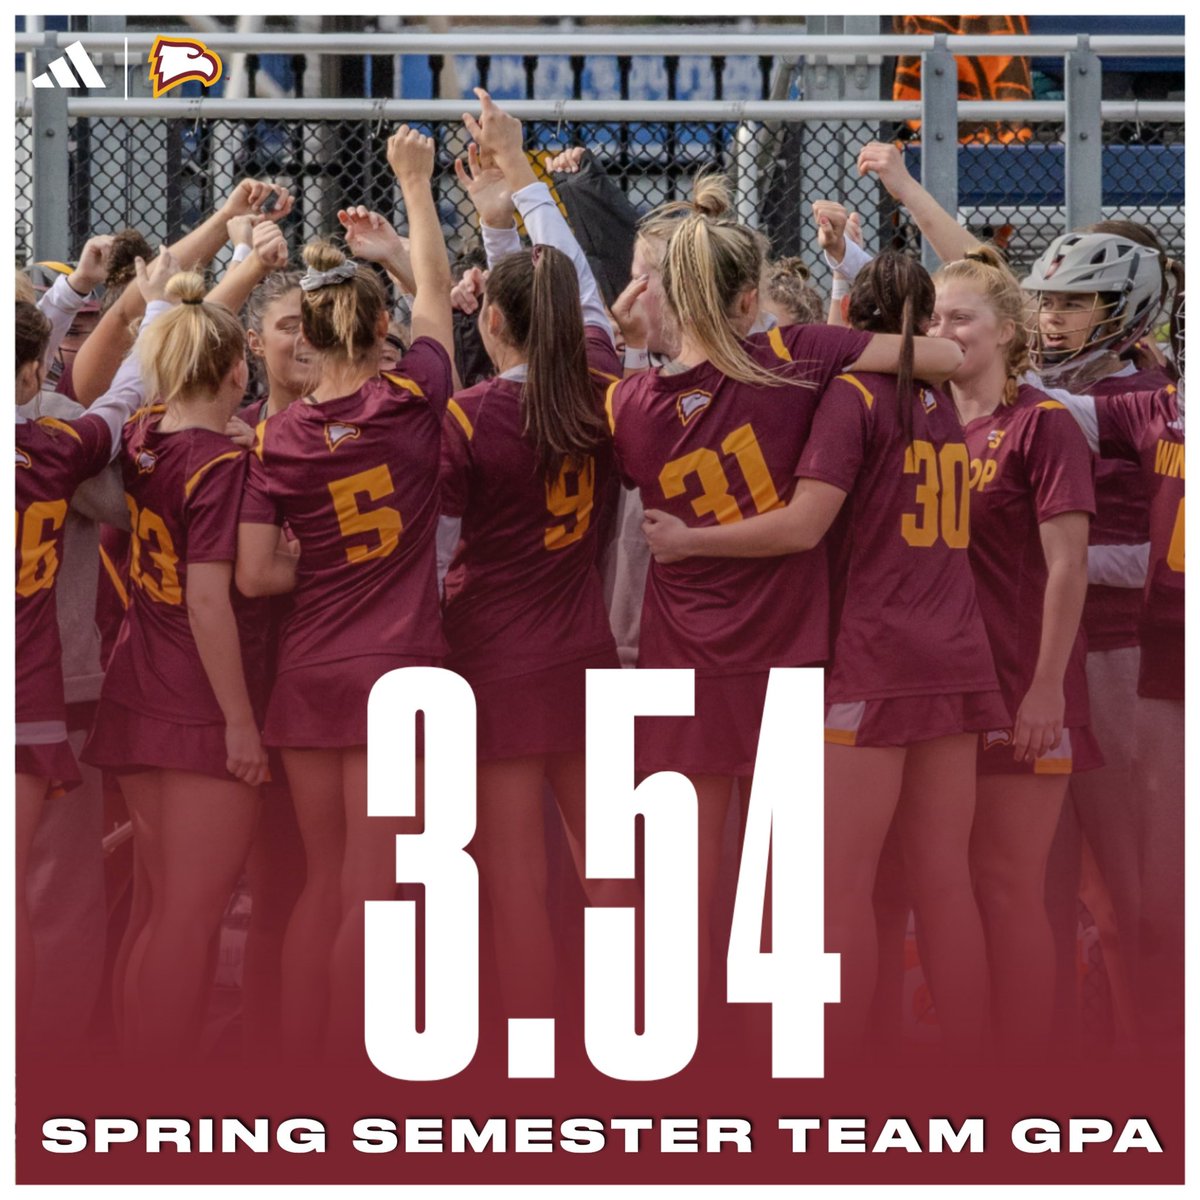 𝐒𝐌𝐀𝐑𝐓𝐘 𝐏𝐀𝐍𝐓𝐒 👖🦅 . In addition to the combined 3.54 we posted as a team, we had 6 student-athletes who earned a 4.0 this semester! 15 more student-athletes finished with a 3.5+ while being in season! Team 11 finished the year strong 💪✏️📔 . #GoEagles | #ROCKtheHILL